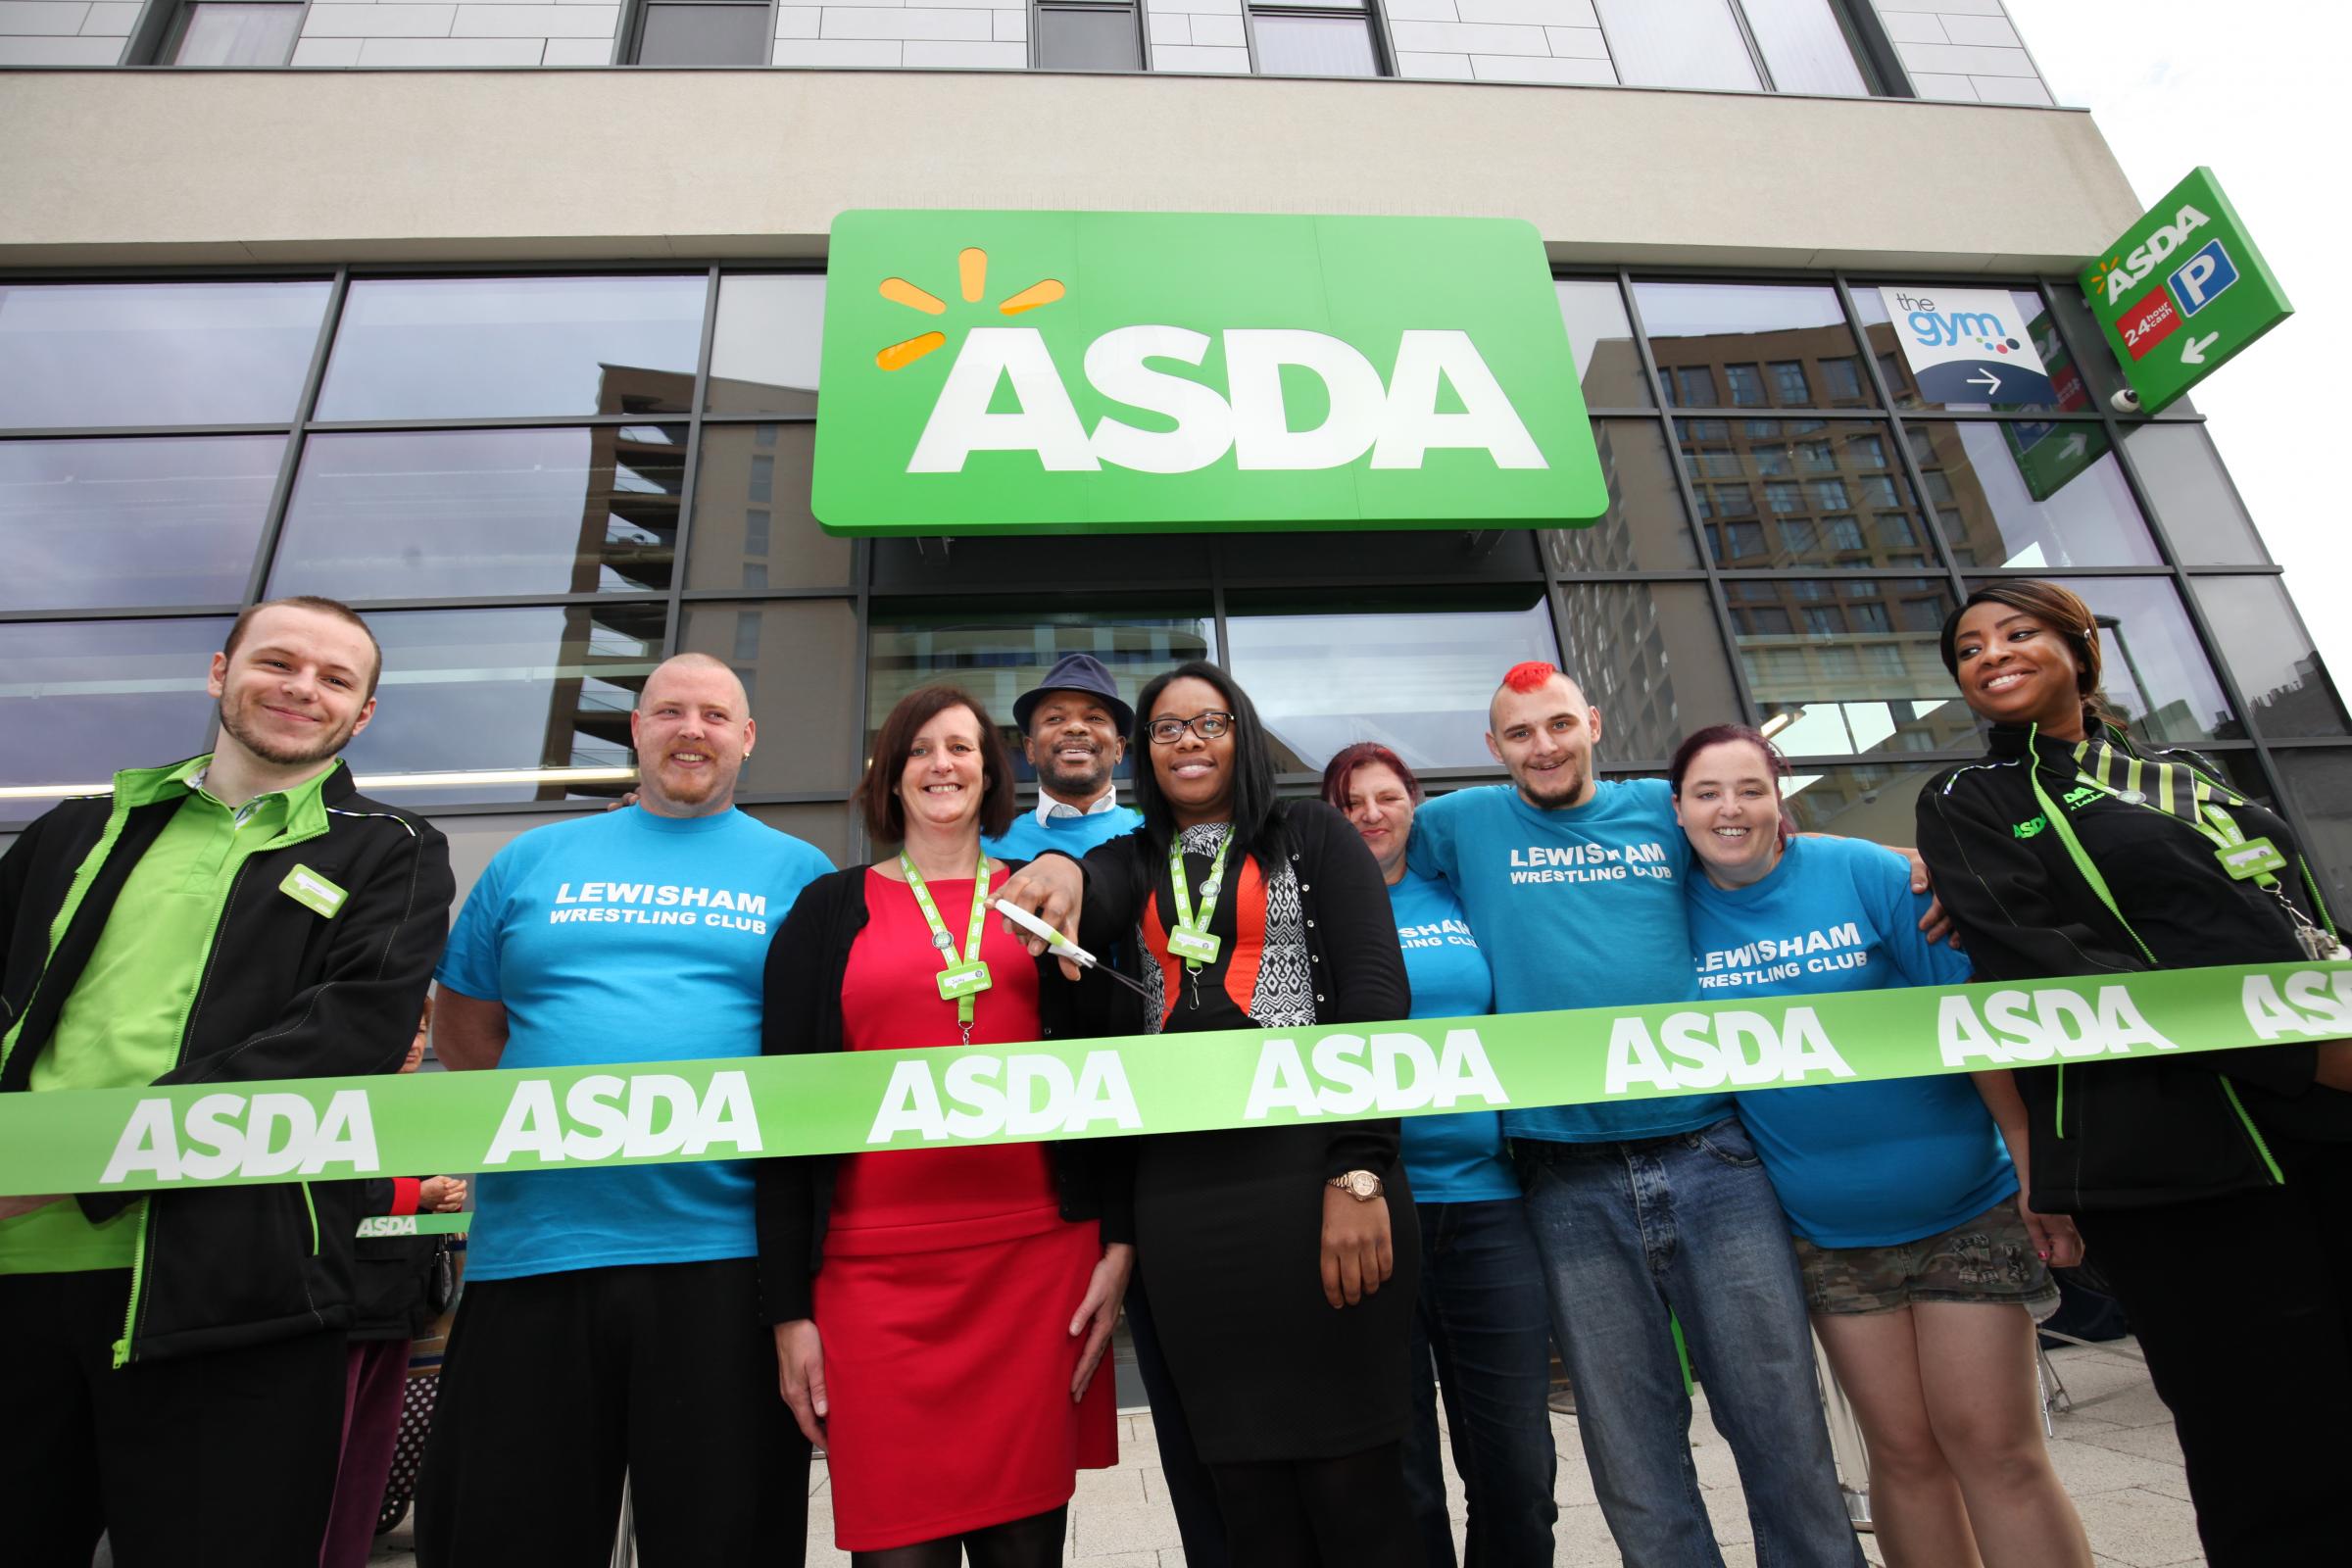 New £8.8m Asda store opens in Lewisham with 80 jobs created